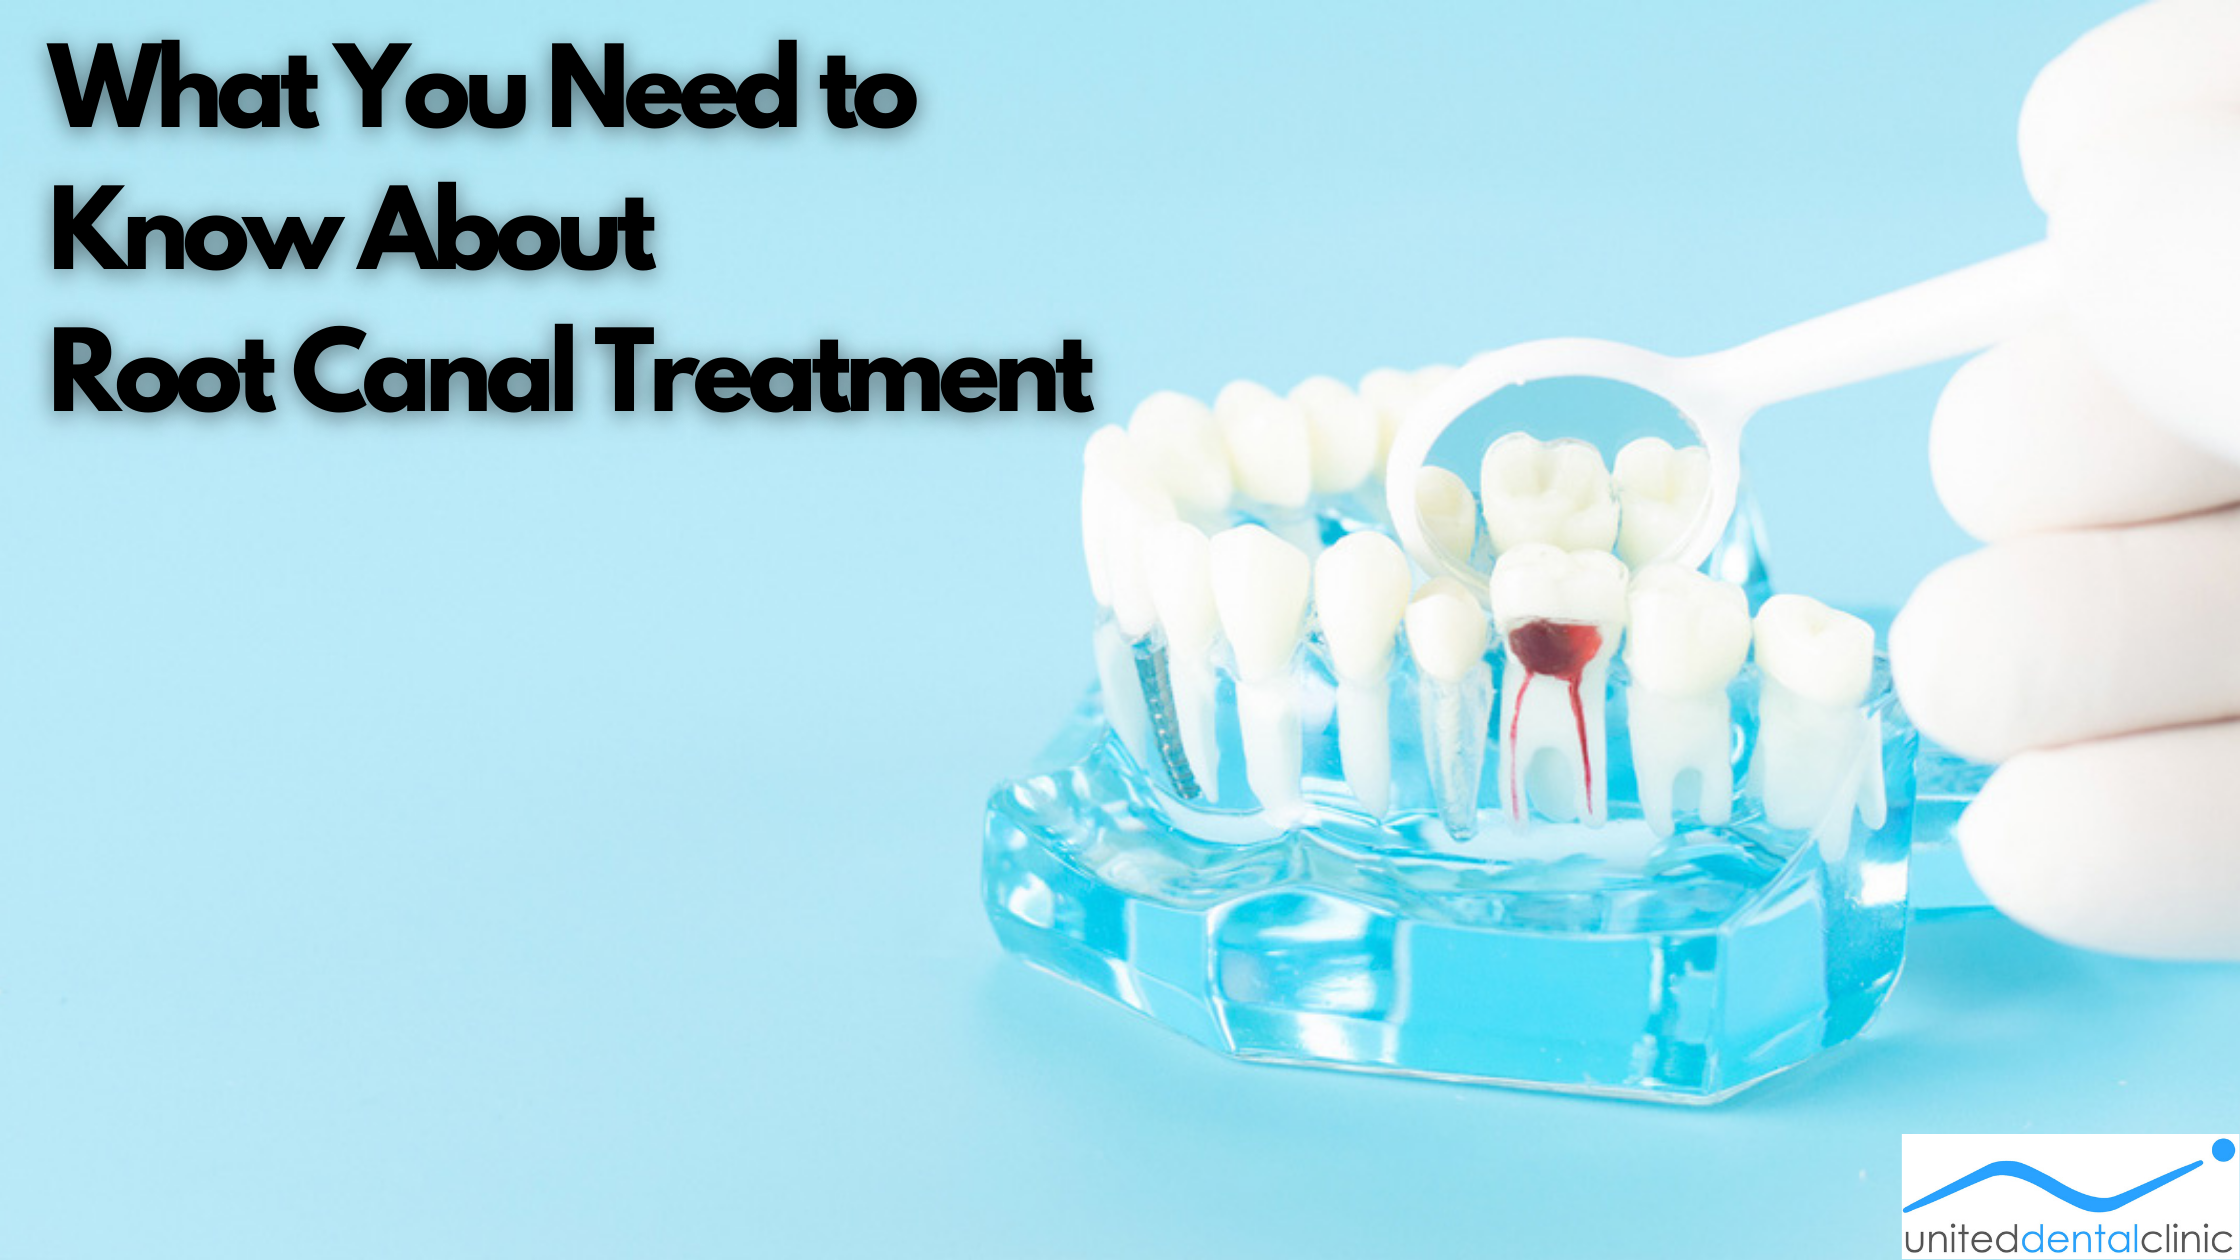 What You Need to Know About Root Canal Treatment?